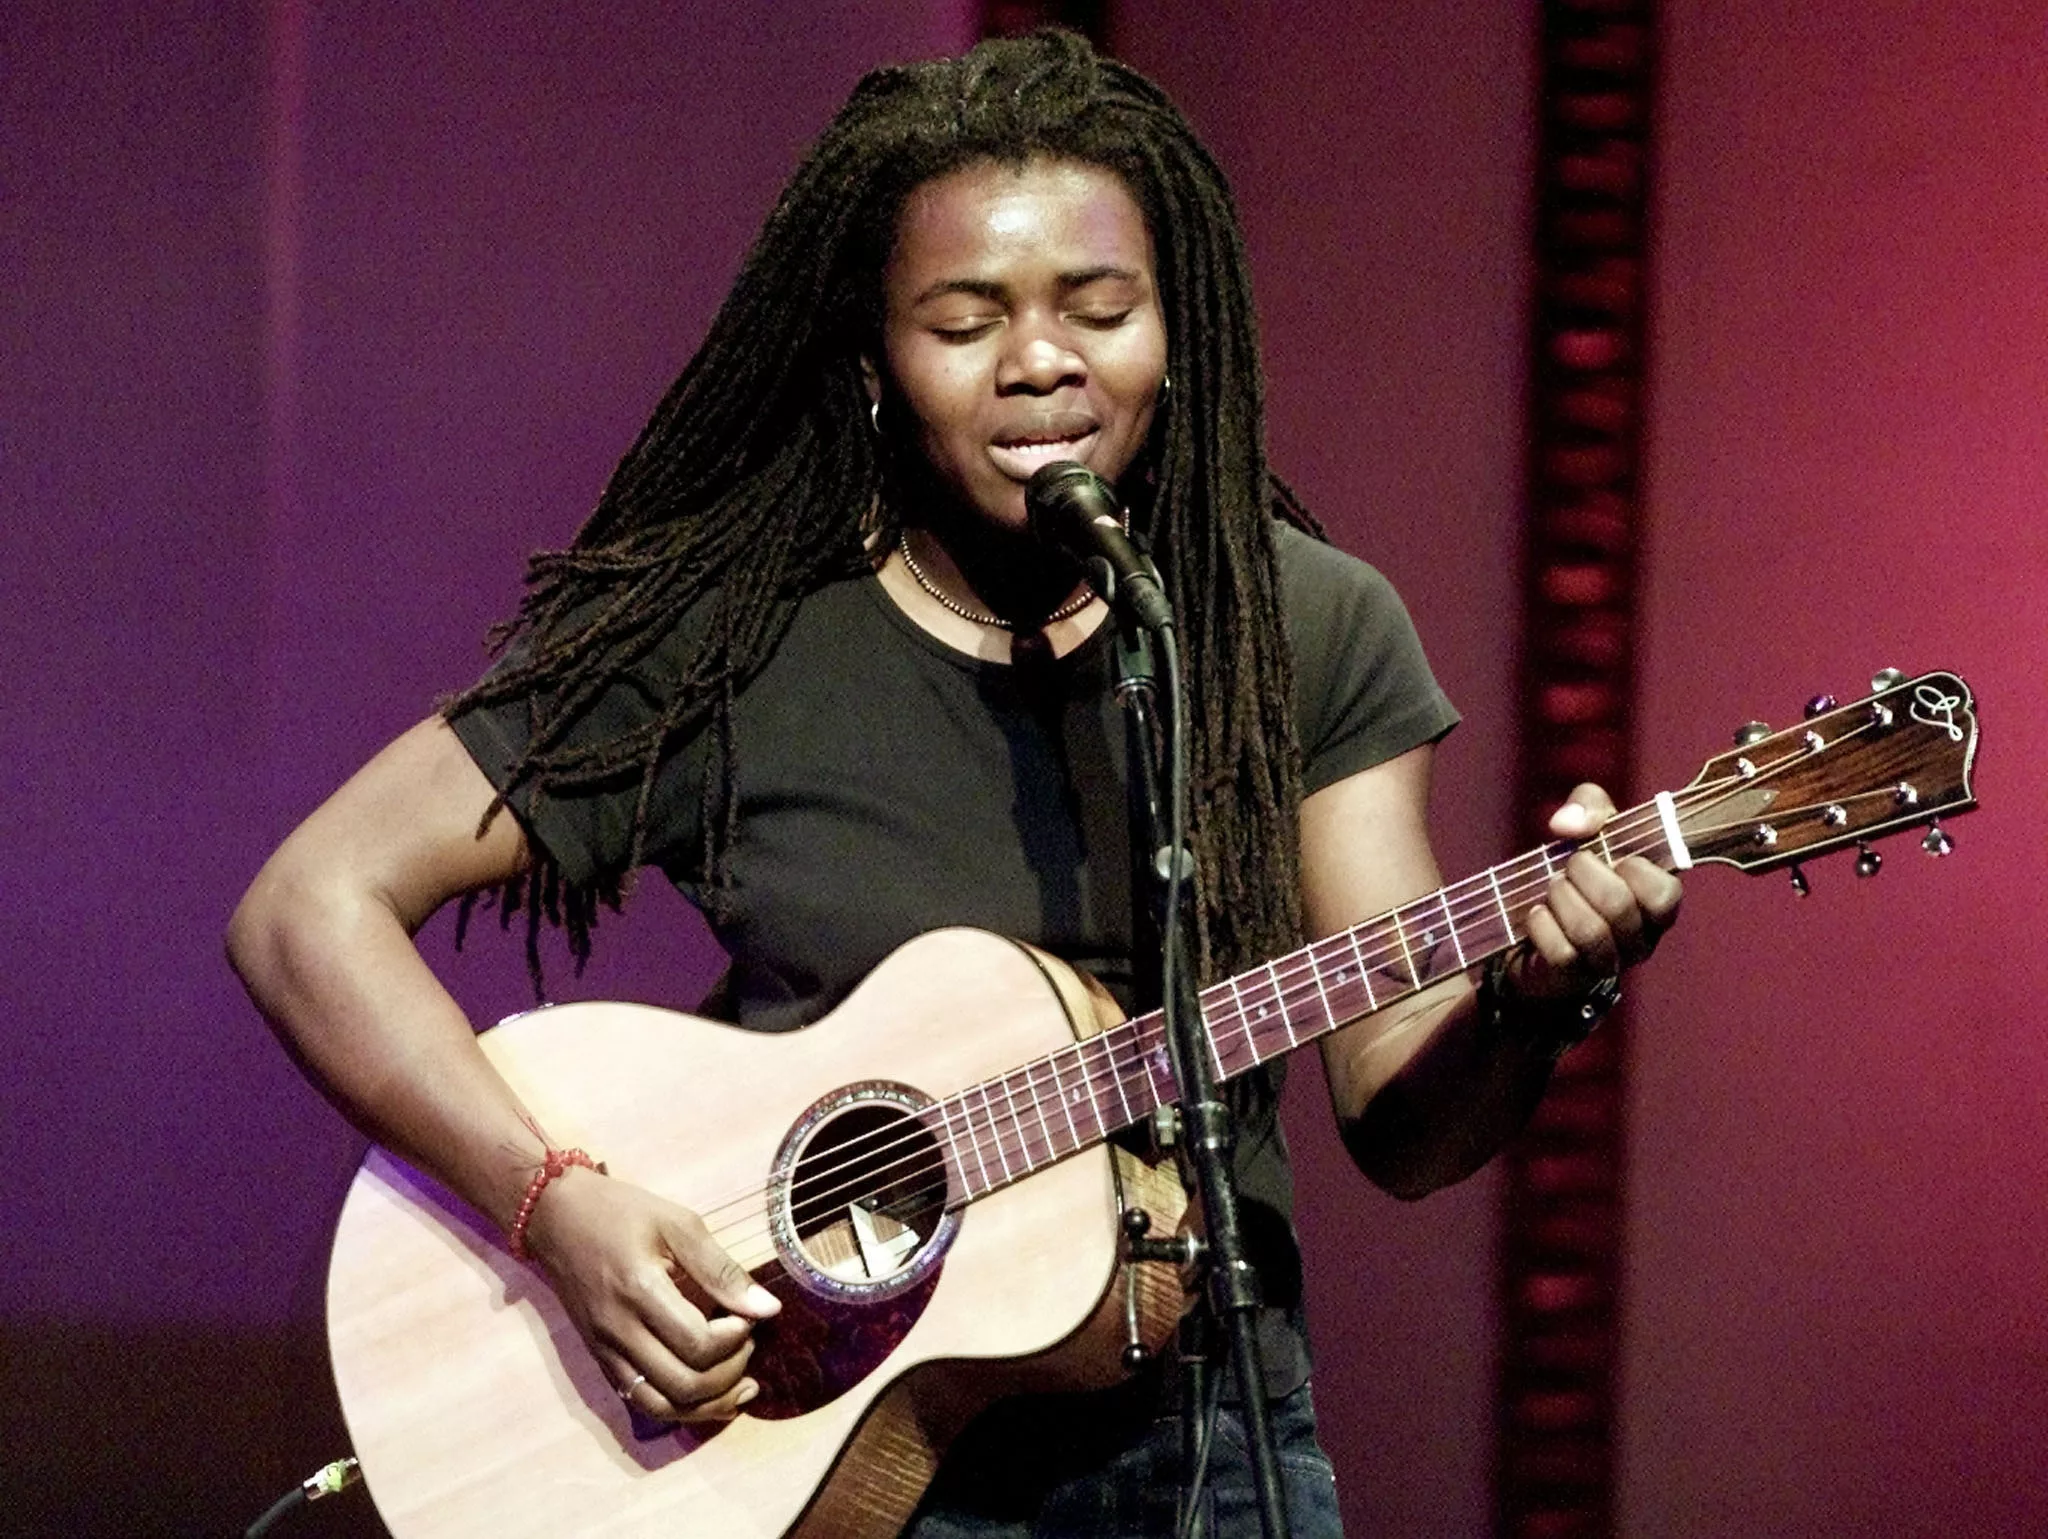 musician-tracy-chapman-sings-at-a-benefit-birthday-tribute-to-bob-dylan-in-new-york-on-may-19-2001